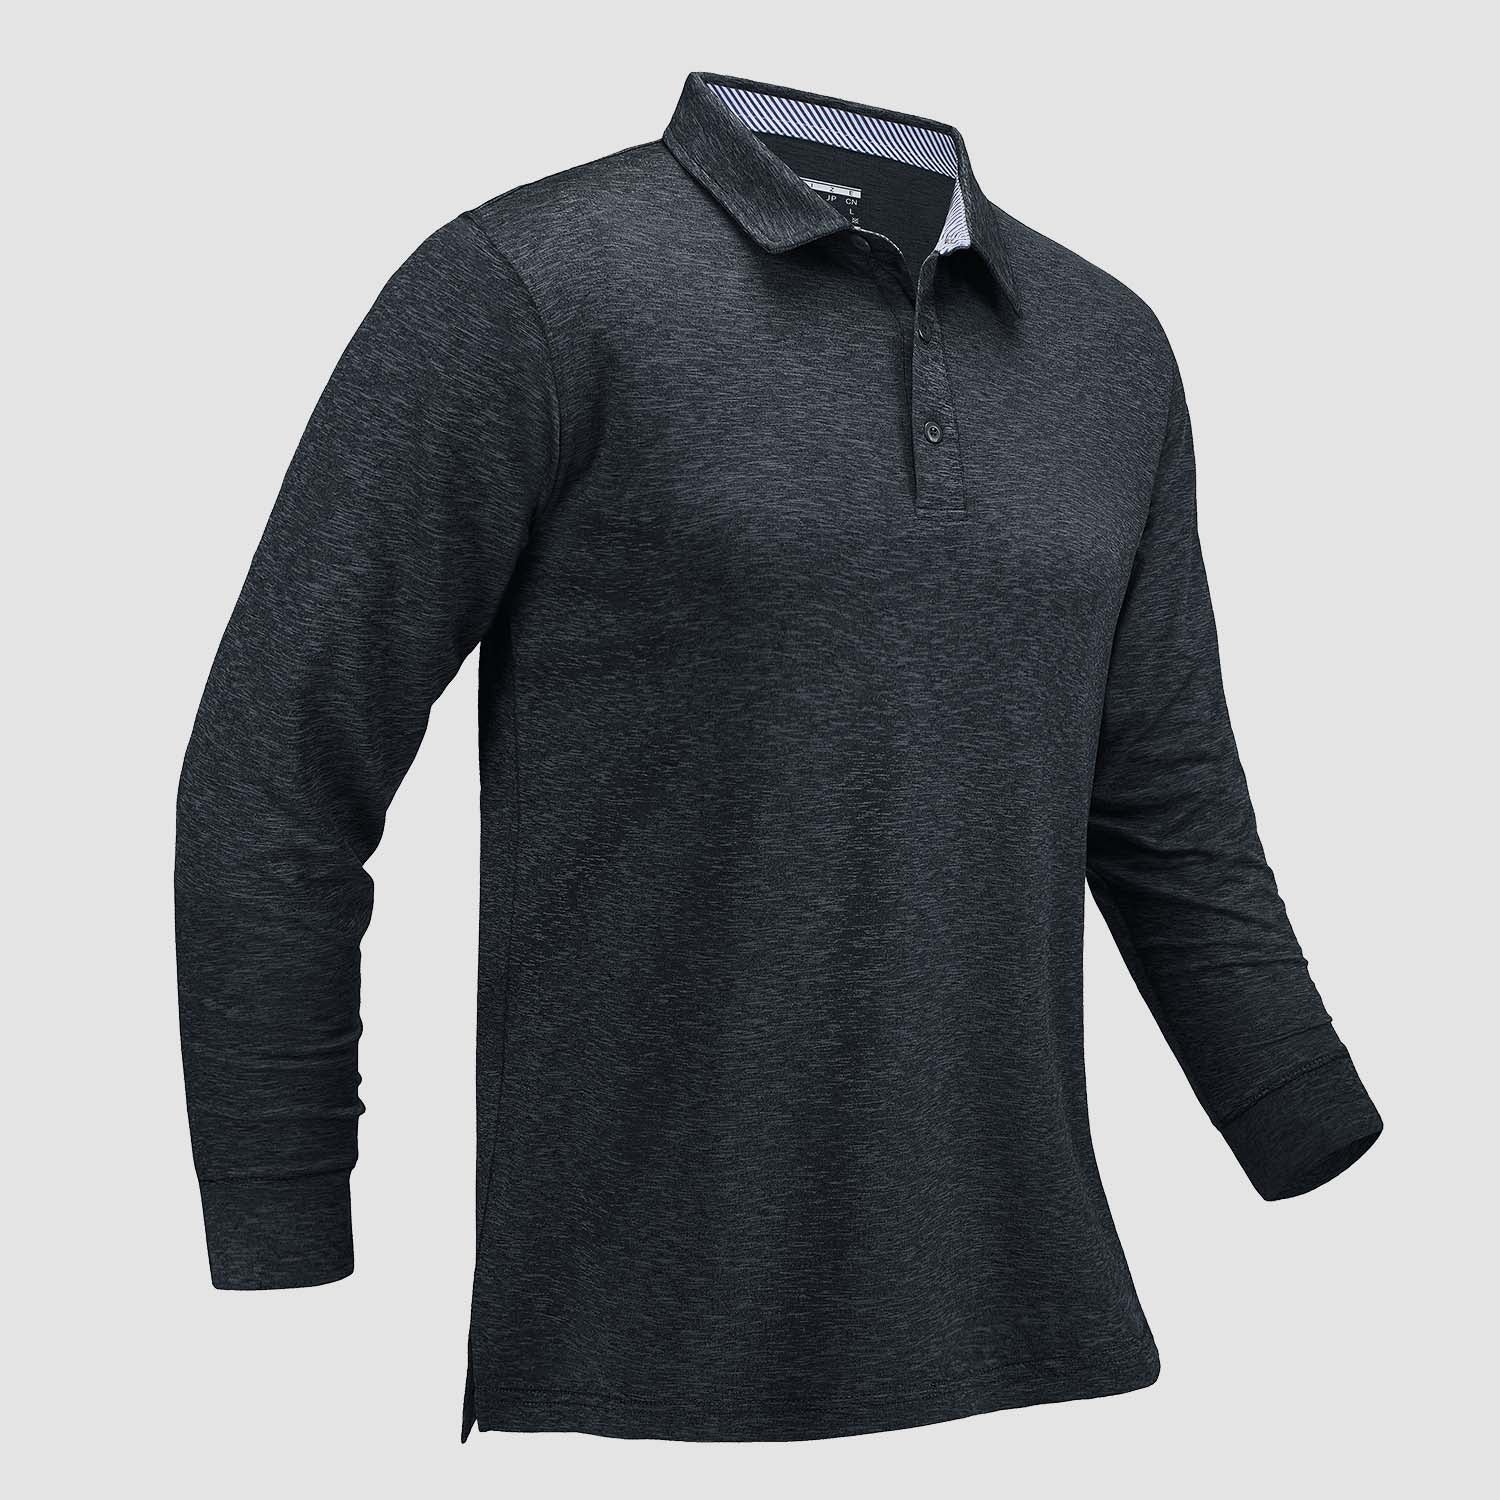 Men's Long Sleeve Golf Polo Shirts Collared Casual Athletic Quick Dry Shirts